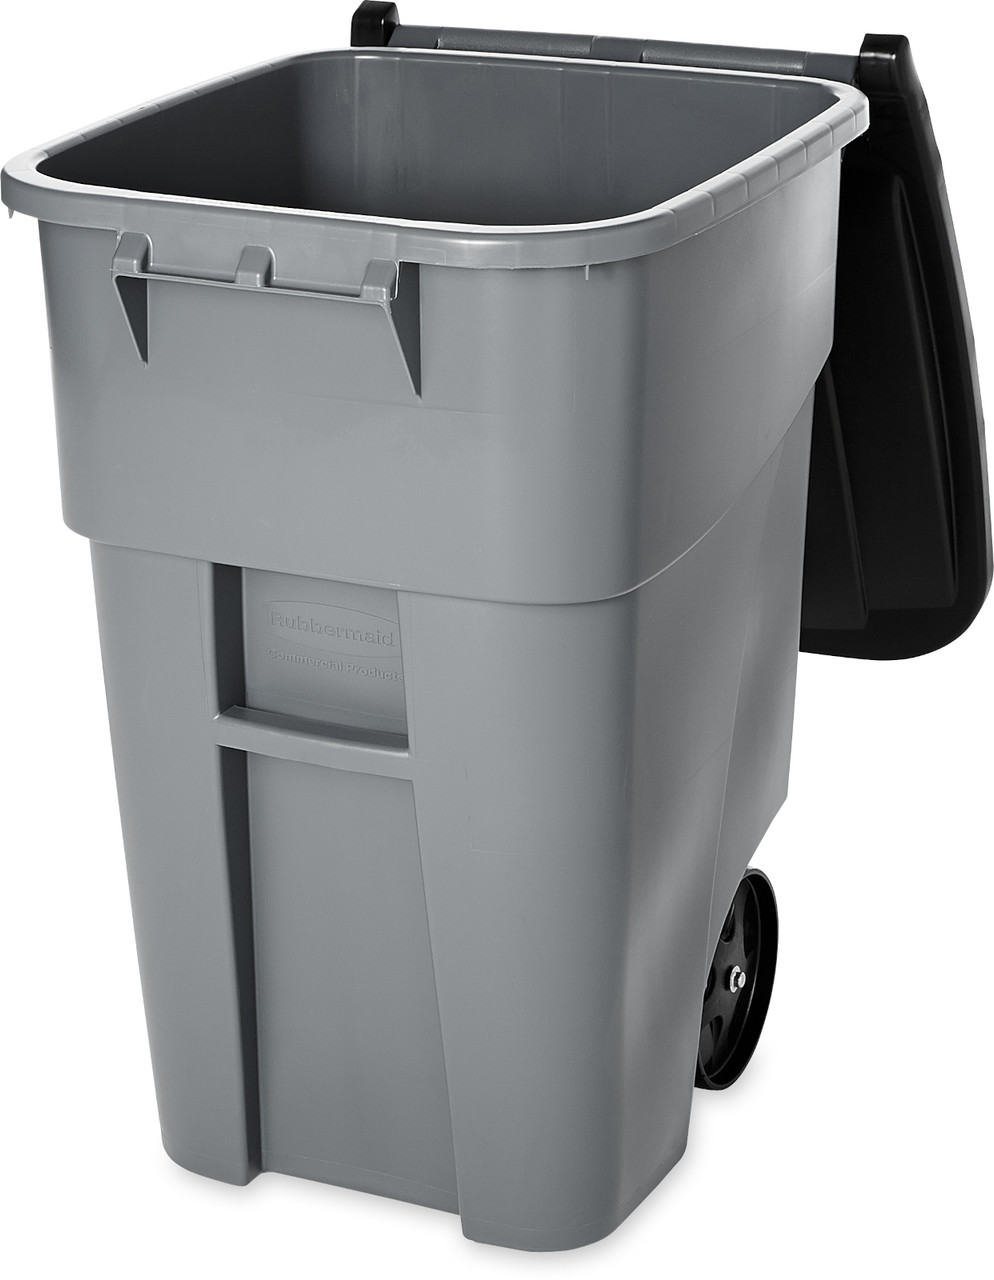 FG9W2700GRAY - Grey Rubbermaid BRUTE Rollout Container with lid open